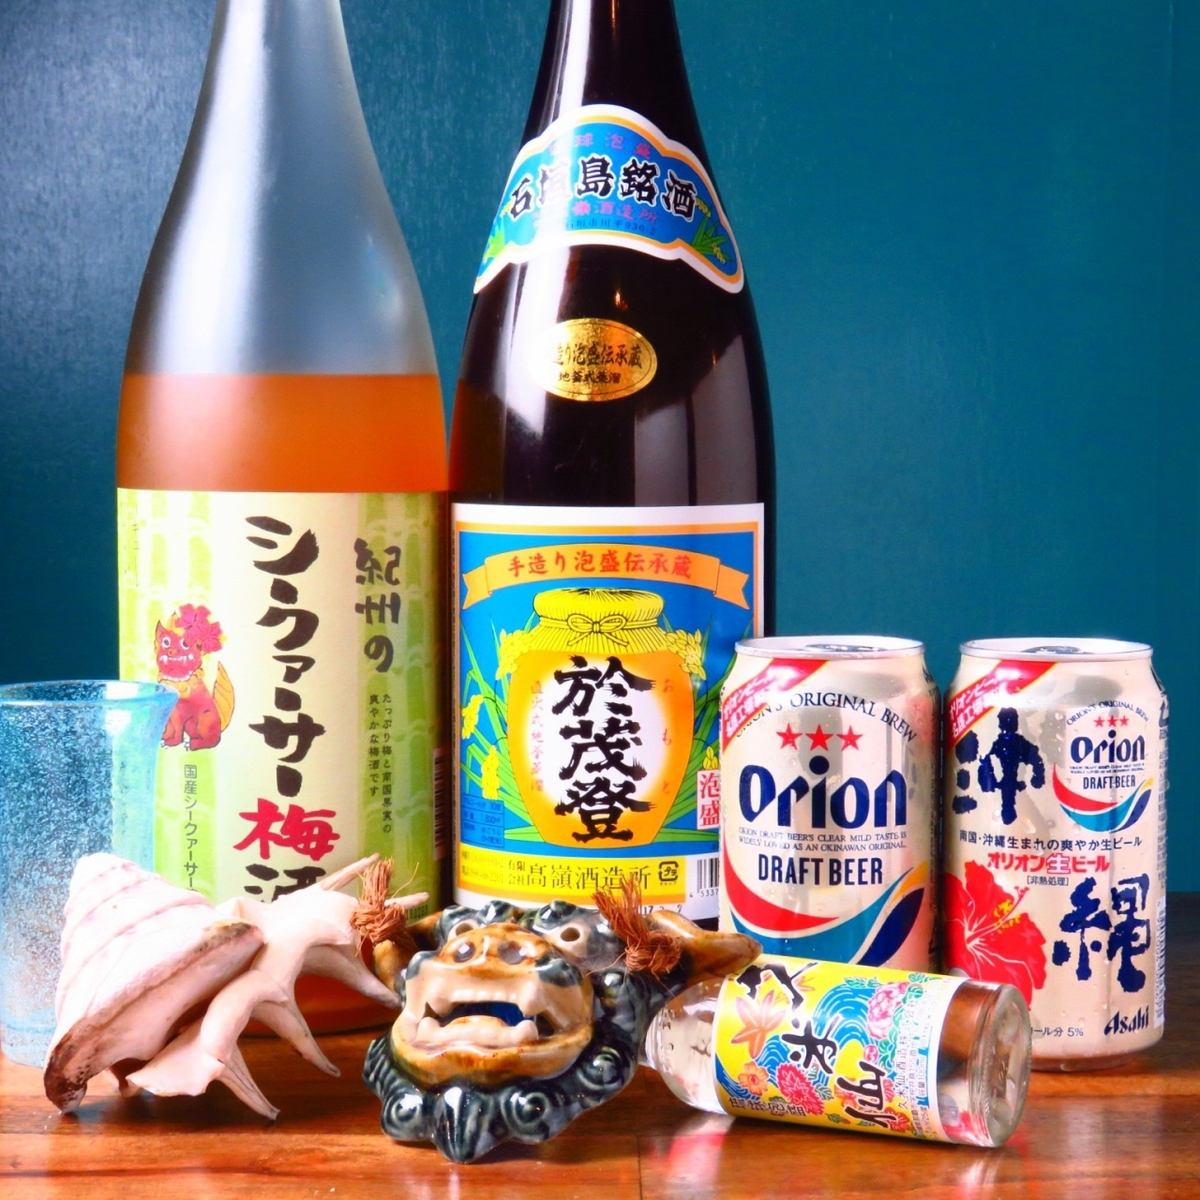 All-you-can-drink including Orion beer is 2000 yen (tax included) !!